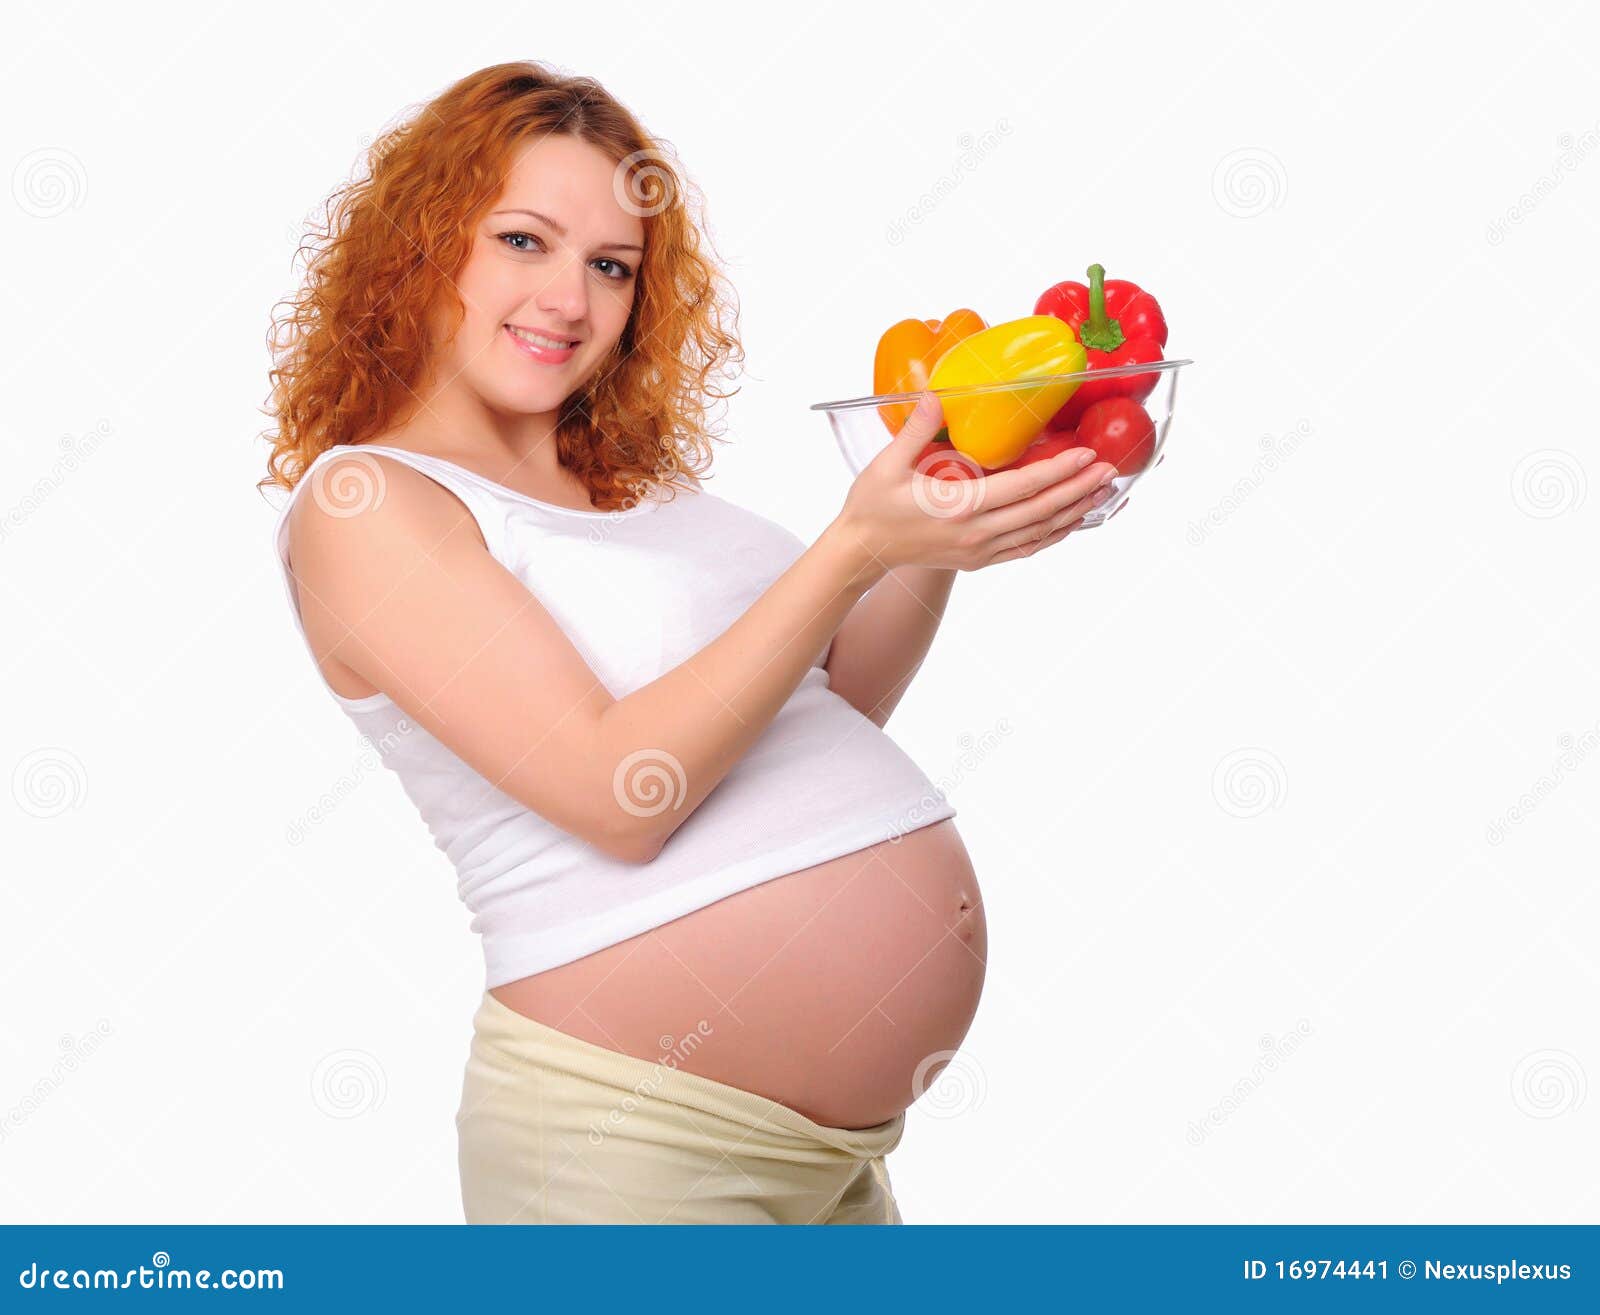 Pregnant Red Heads 95